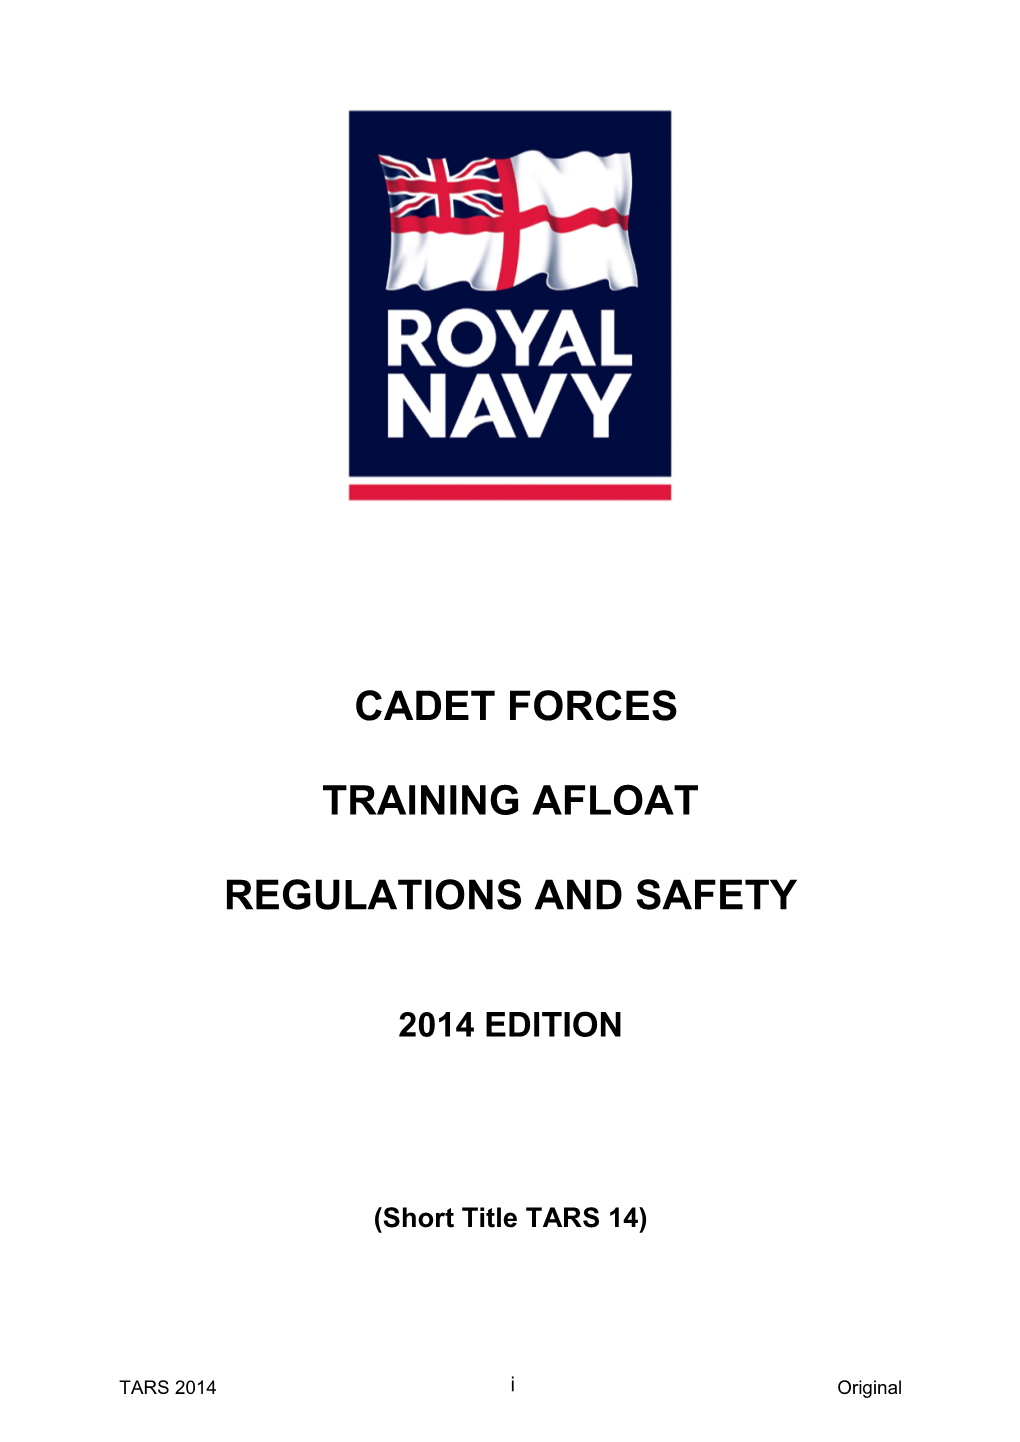 Cadet Forces Training Afloat Regulations and Safety